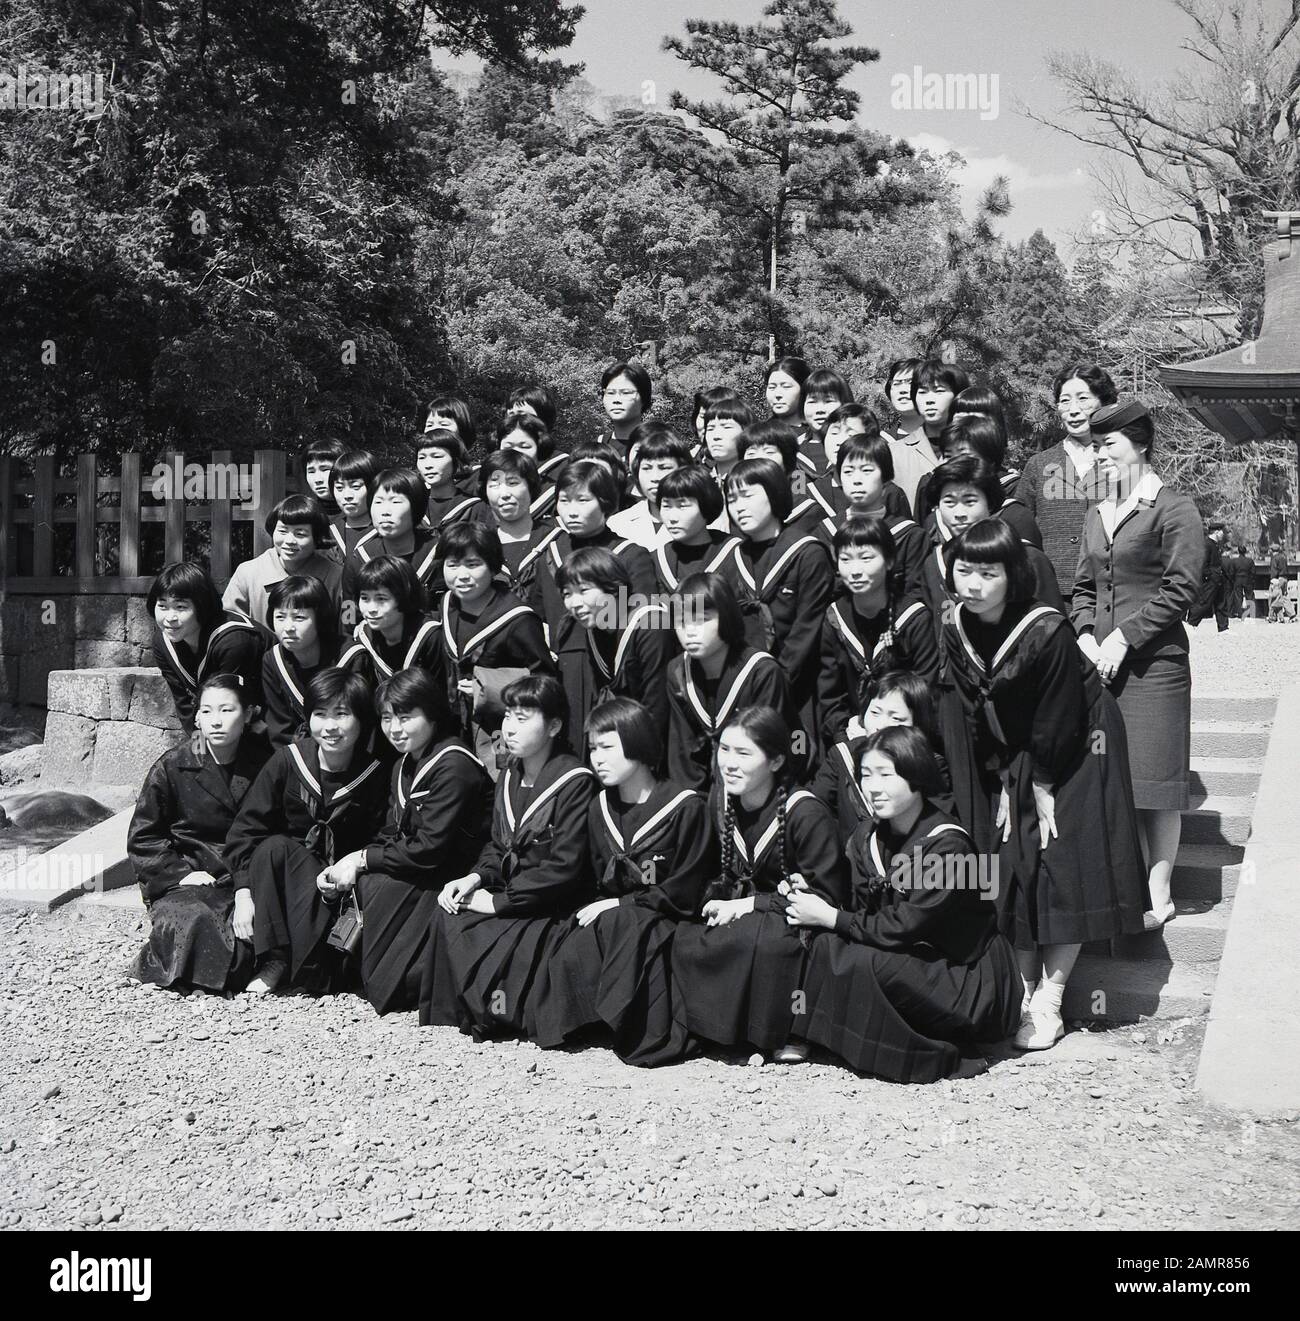 1960s, historical, group of uniformed Japanese school girls on a school outing posing together for a picture, Japan. Stock Photo